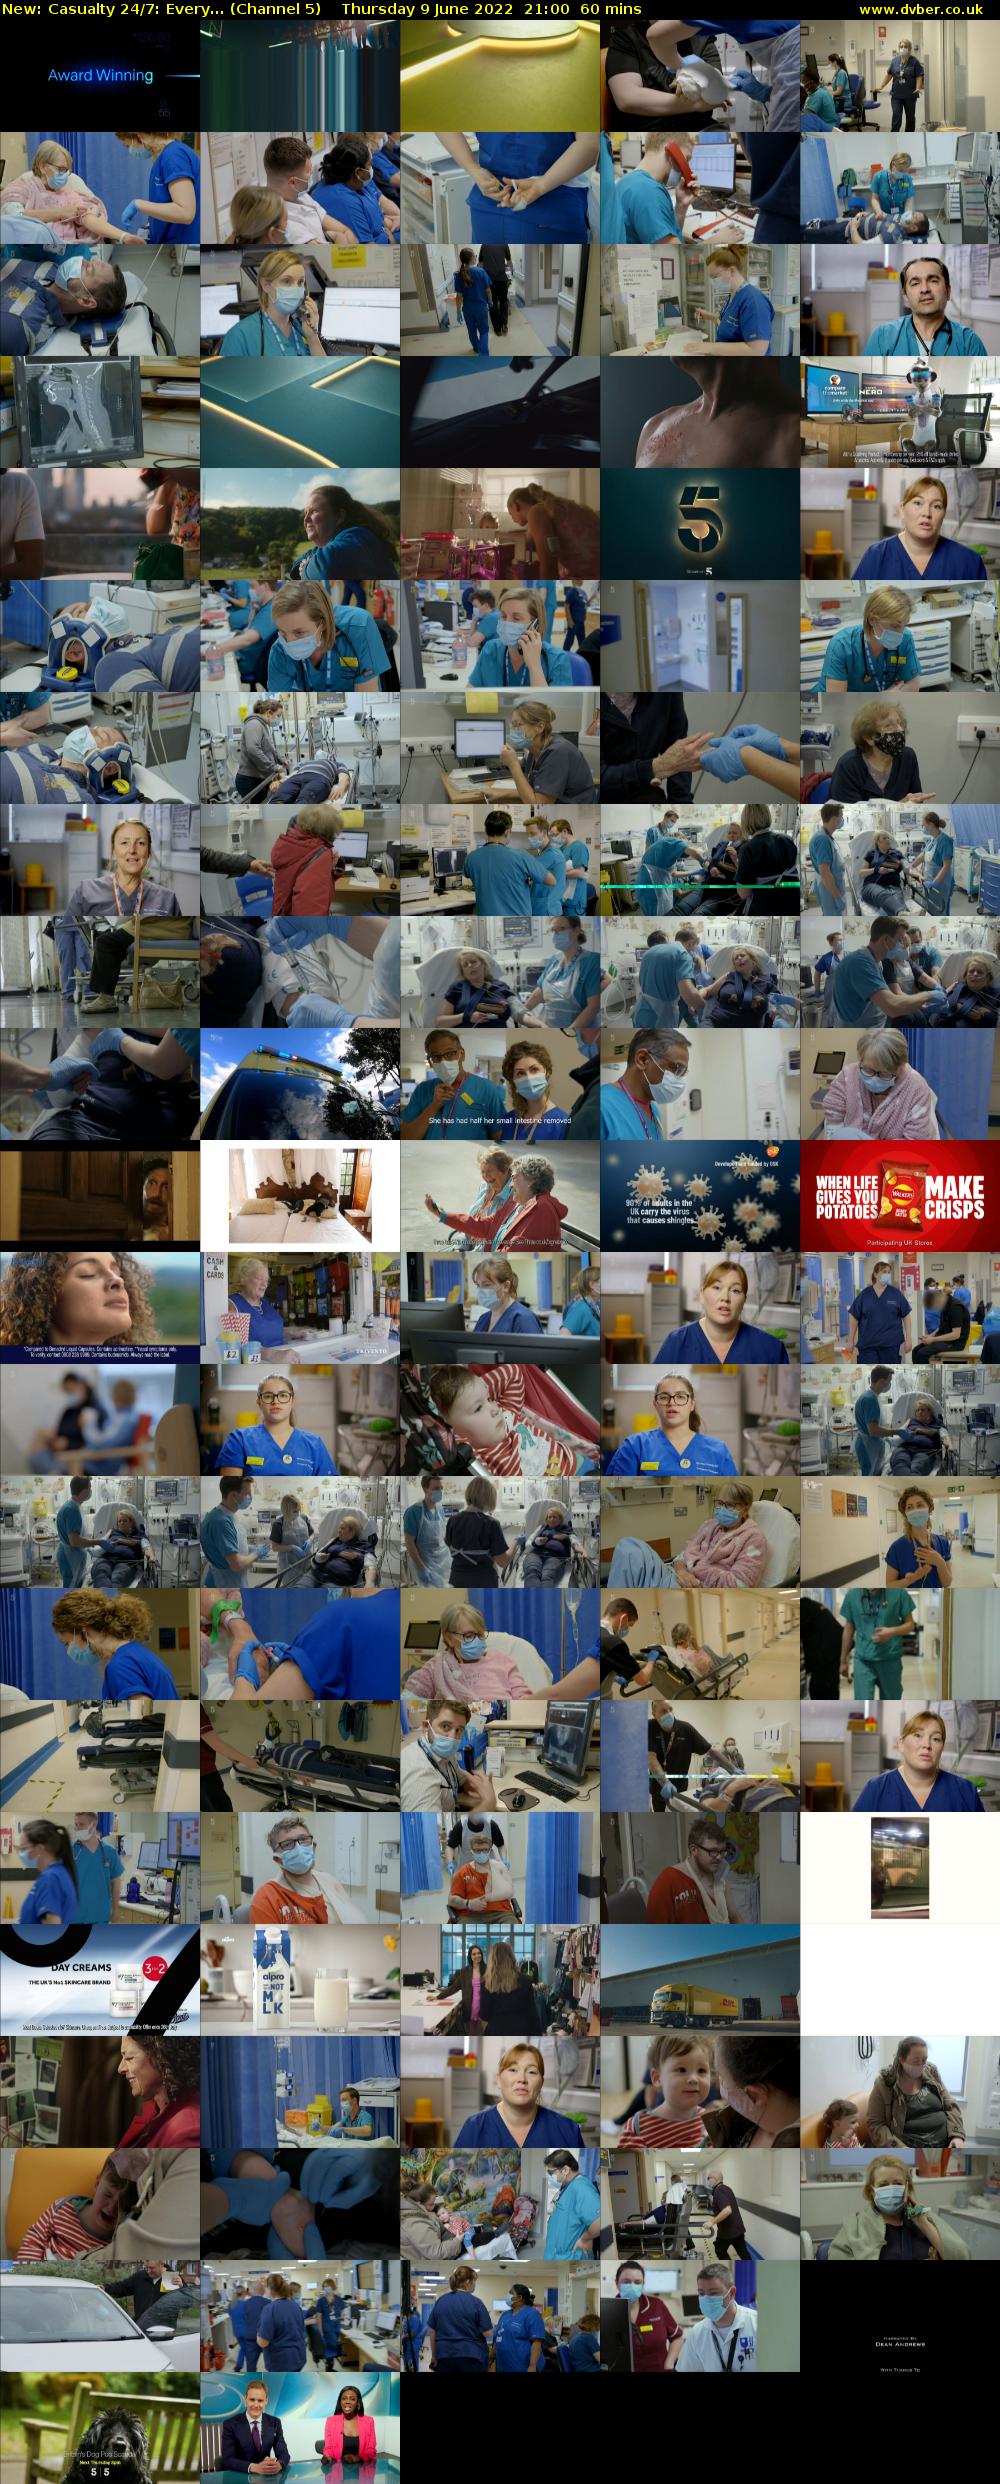 Casualty 24/7: Every... (Channel 5) Thursday 9 June 2022 21:00 - 22:00